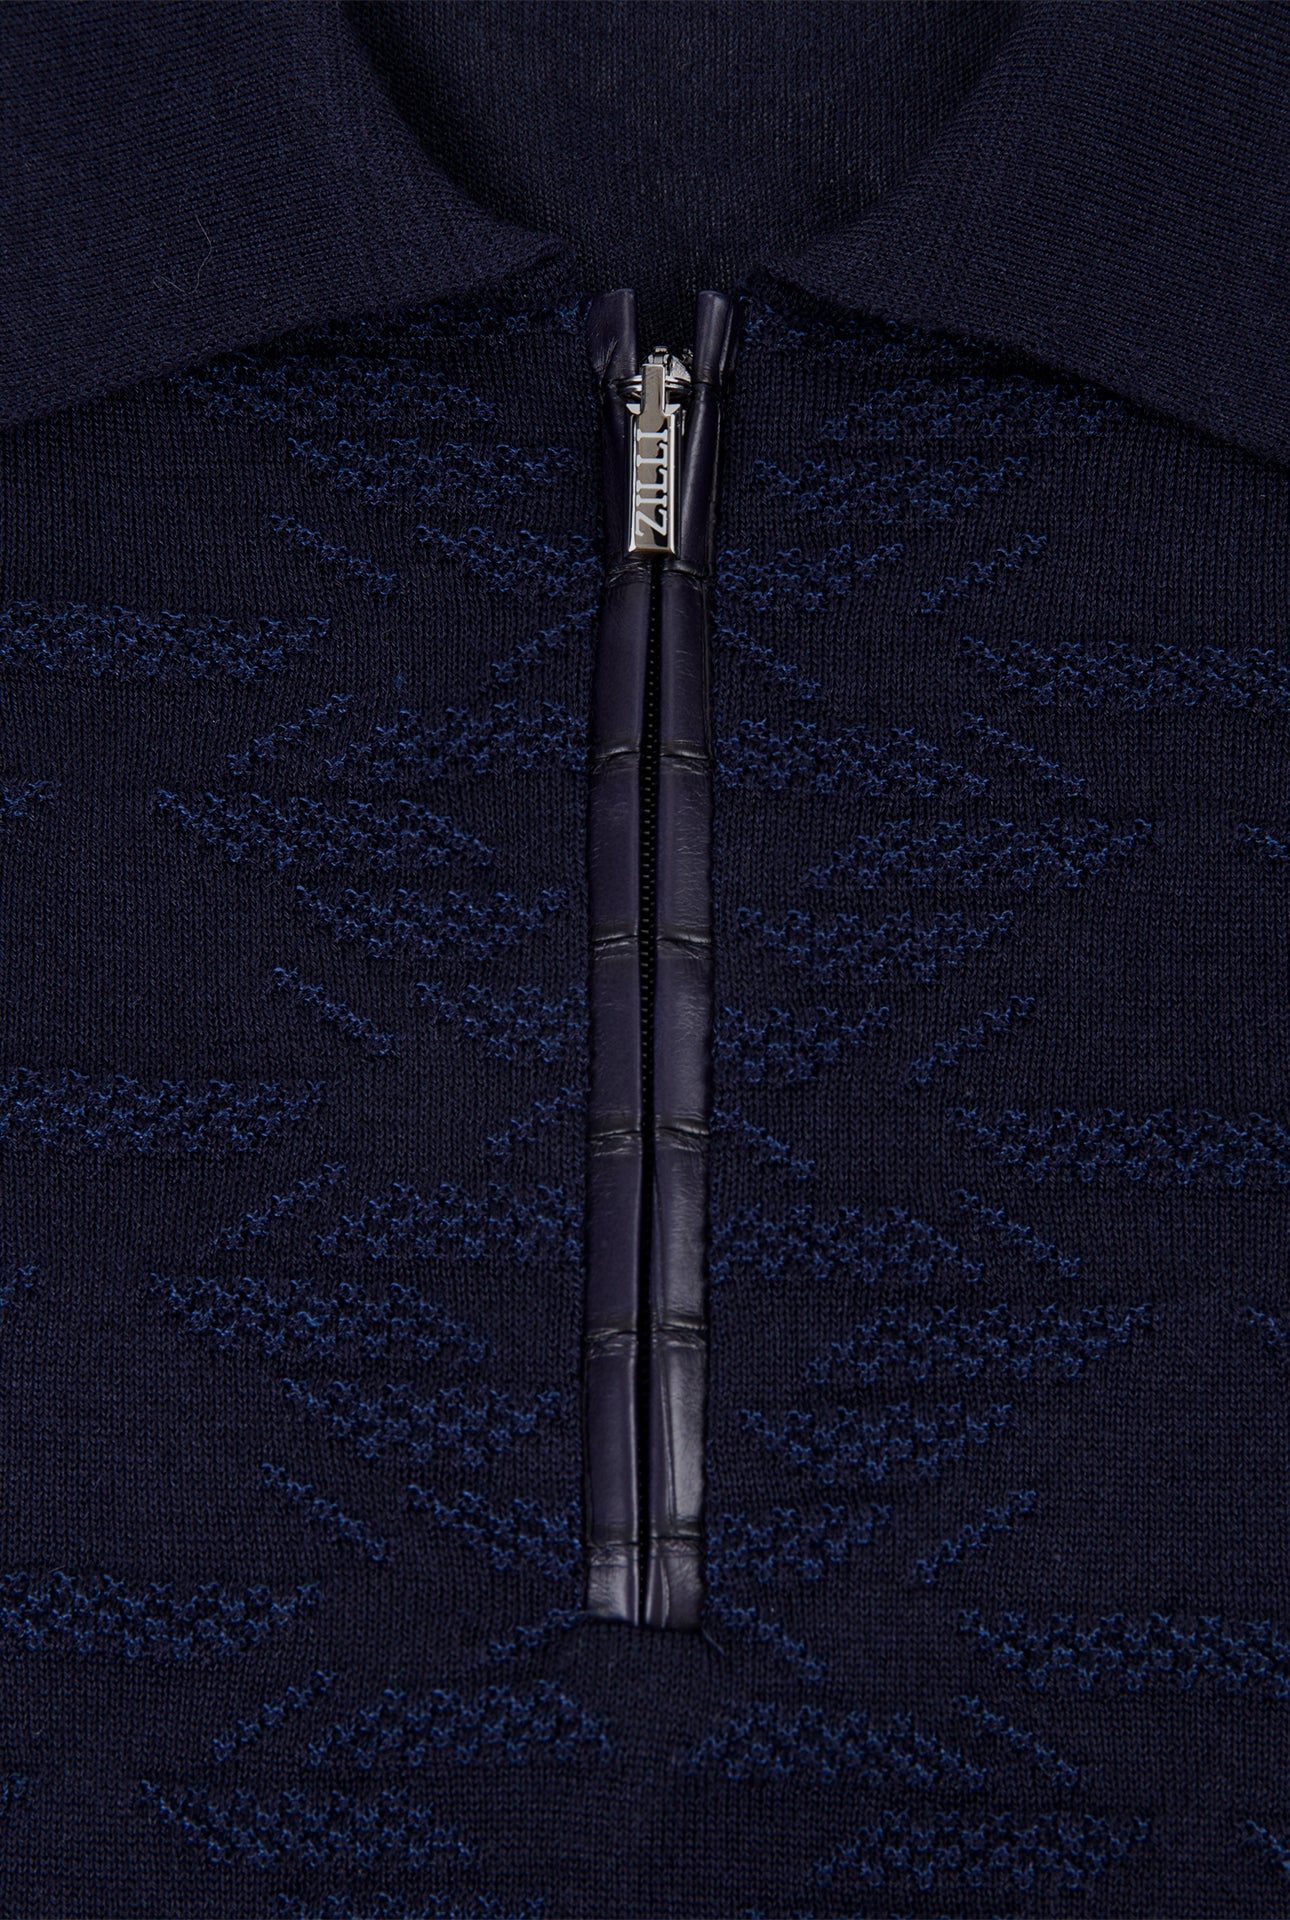 Long Sleeve Zipped Polo with "Vanisé Express" Pattern